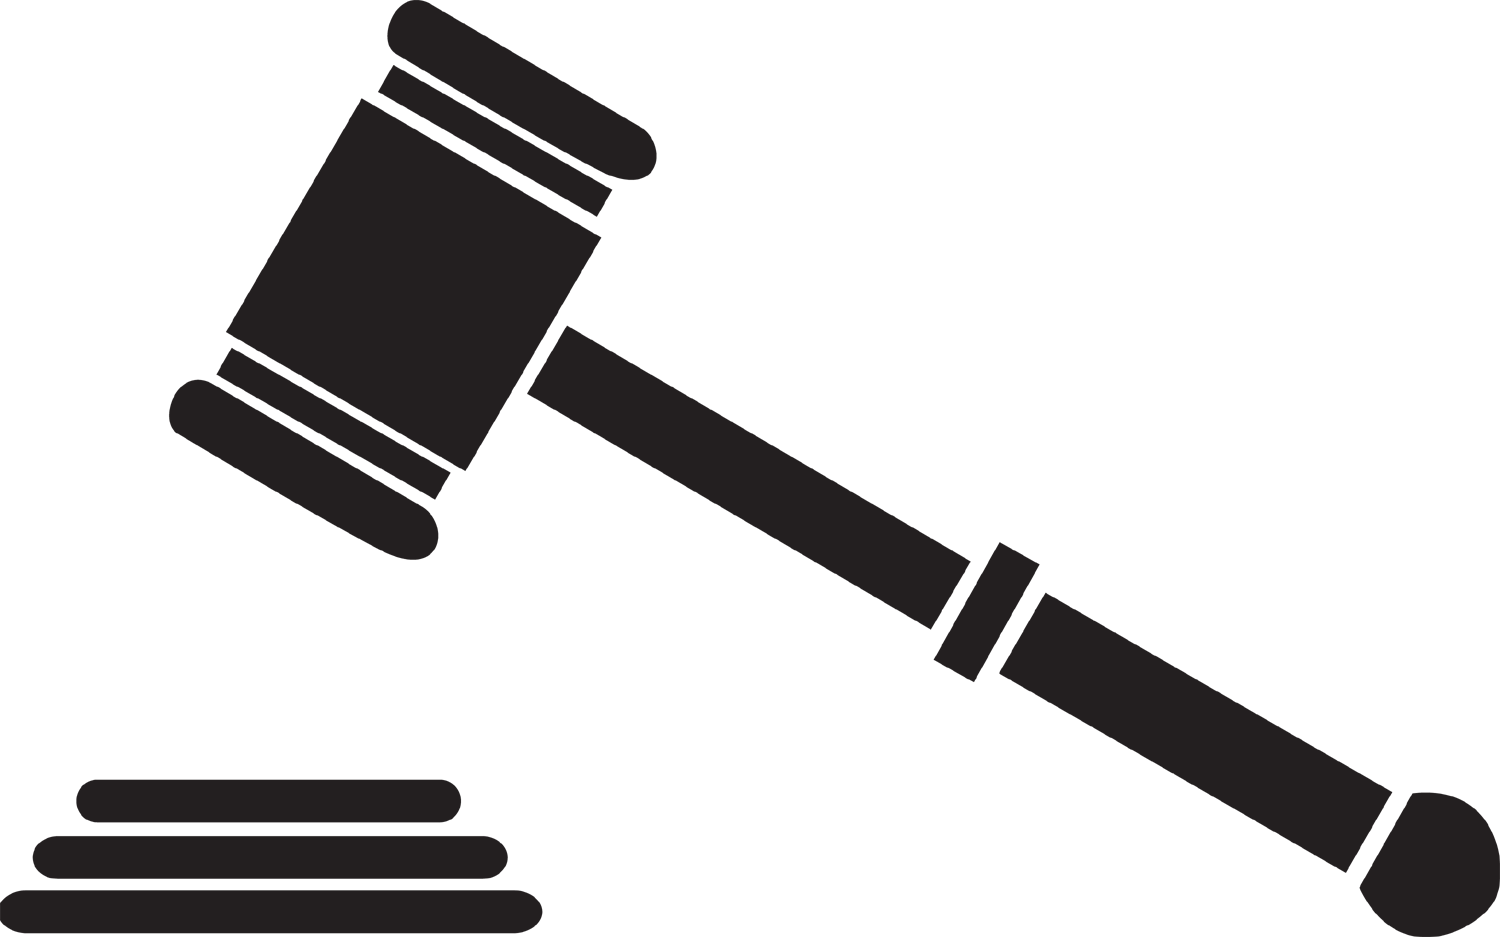 Gavel clipart free clipart image